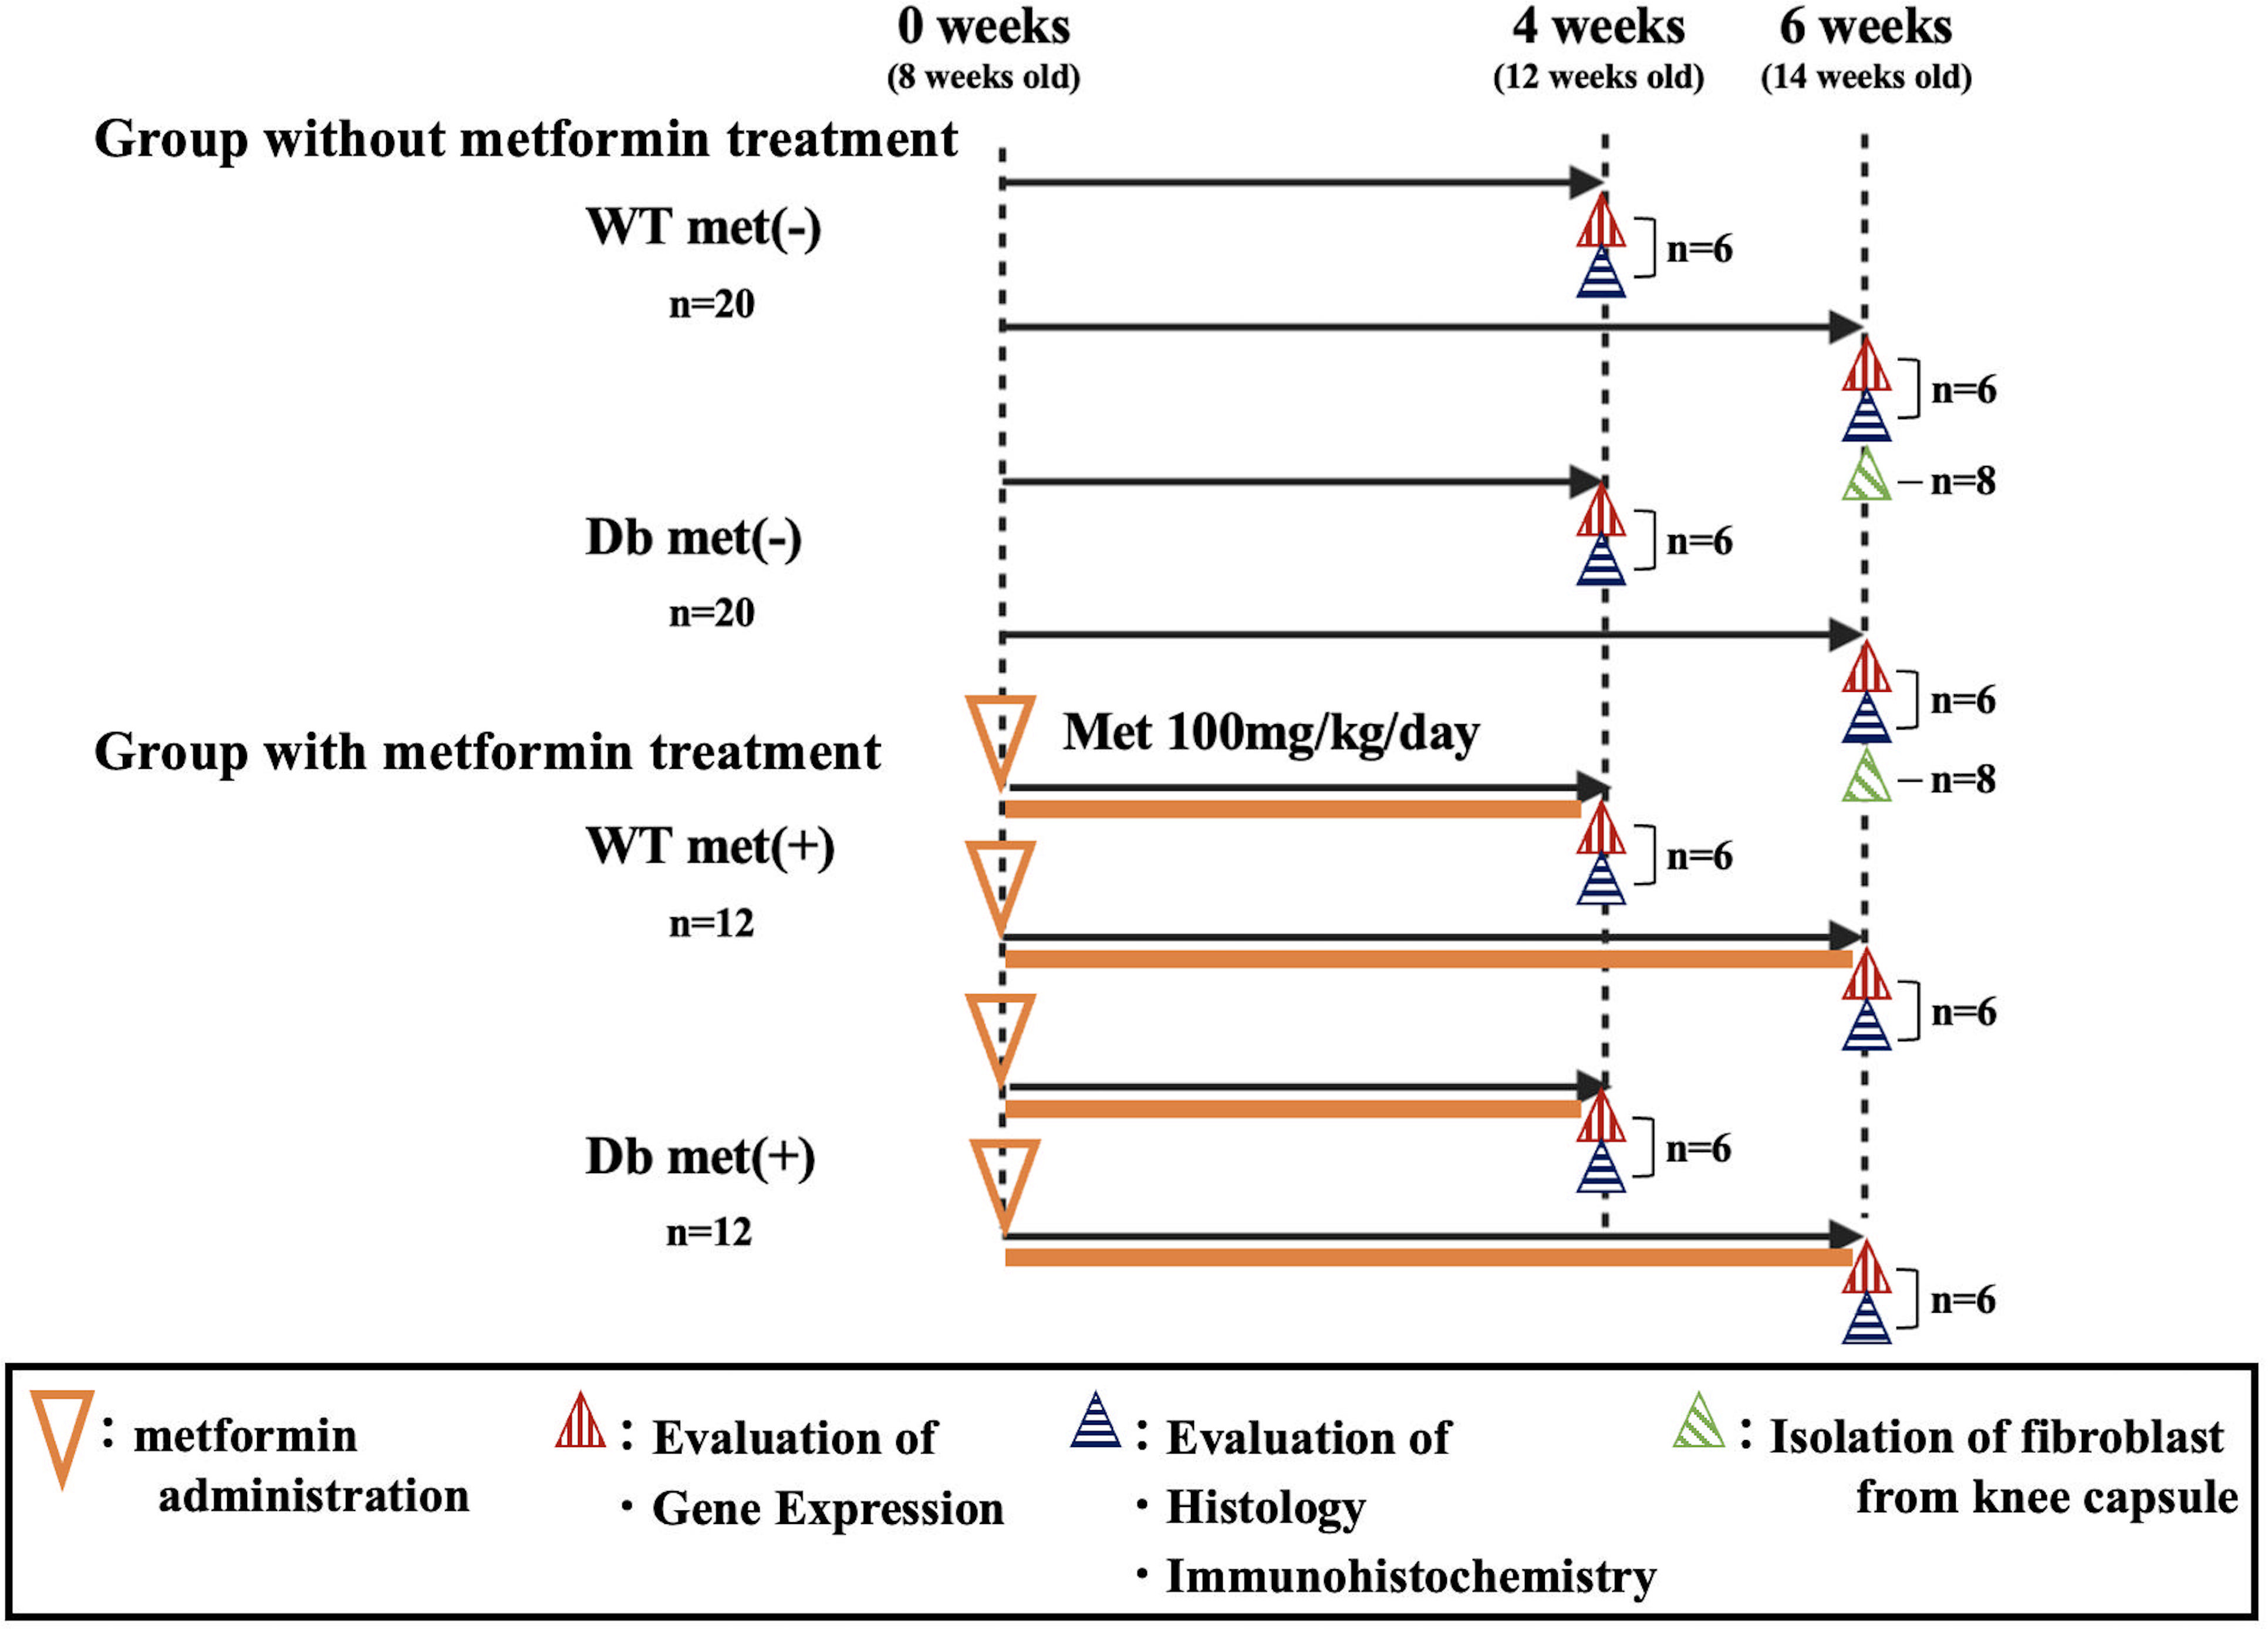 Fig. 1 
            Study flowchart. The experiment comprised four main groups categorized as wild-type or diabetic, with and without metformin administration. Metformin administration was initiated at week 0 (8-week-old mice); six animals in each group received metformin until week 4 (12-week-old mice) or week 6 (14-week-old mice). Mice from each group were killed at weeks 12 and 14 of age. Complementary DNA (cDNA) was synthesized from total RNA isolated from the knee joint capsule for genetic evaluation, and knee joints were paraffin-embedded for morphological and immunohistochemical evaluation. WT met(-), wild-type mice without metformin; Db met(-), type 2 diabetes mouse model without metformin; WT met(+), wild-type mice with metformin; and Db met(+), type 2 diabetes mouse model with metformin.
          